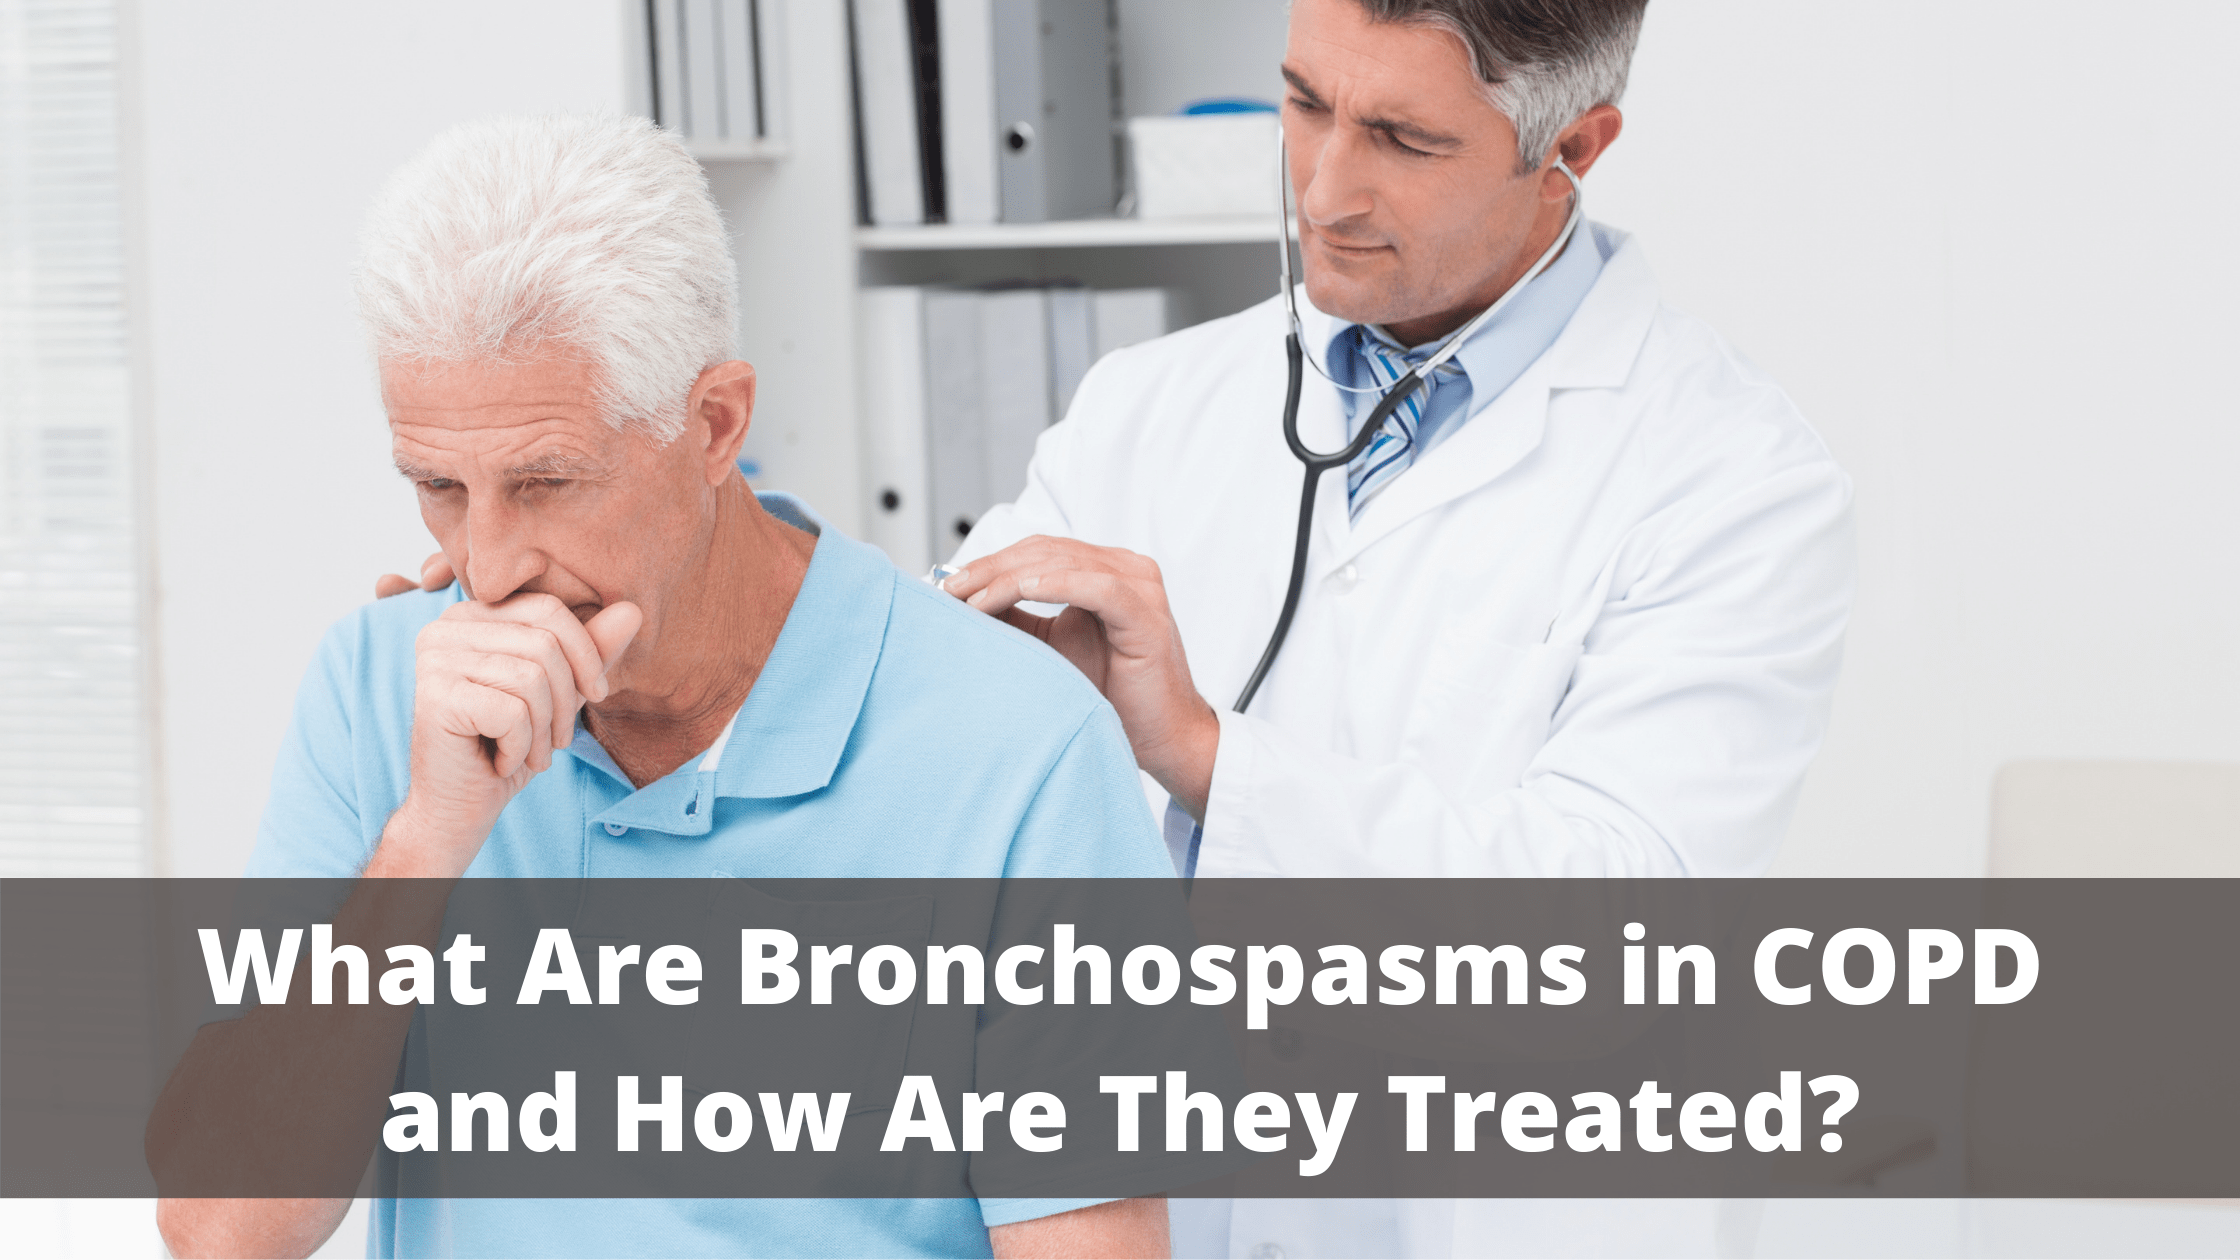 What Are Bronchospasms in COPD and How Are They Treated?